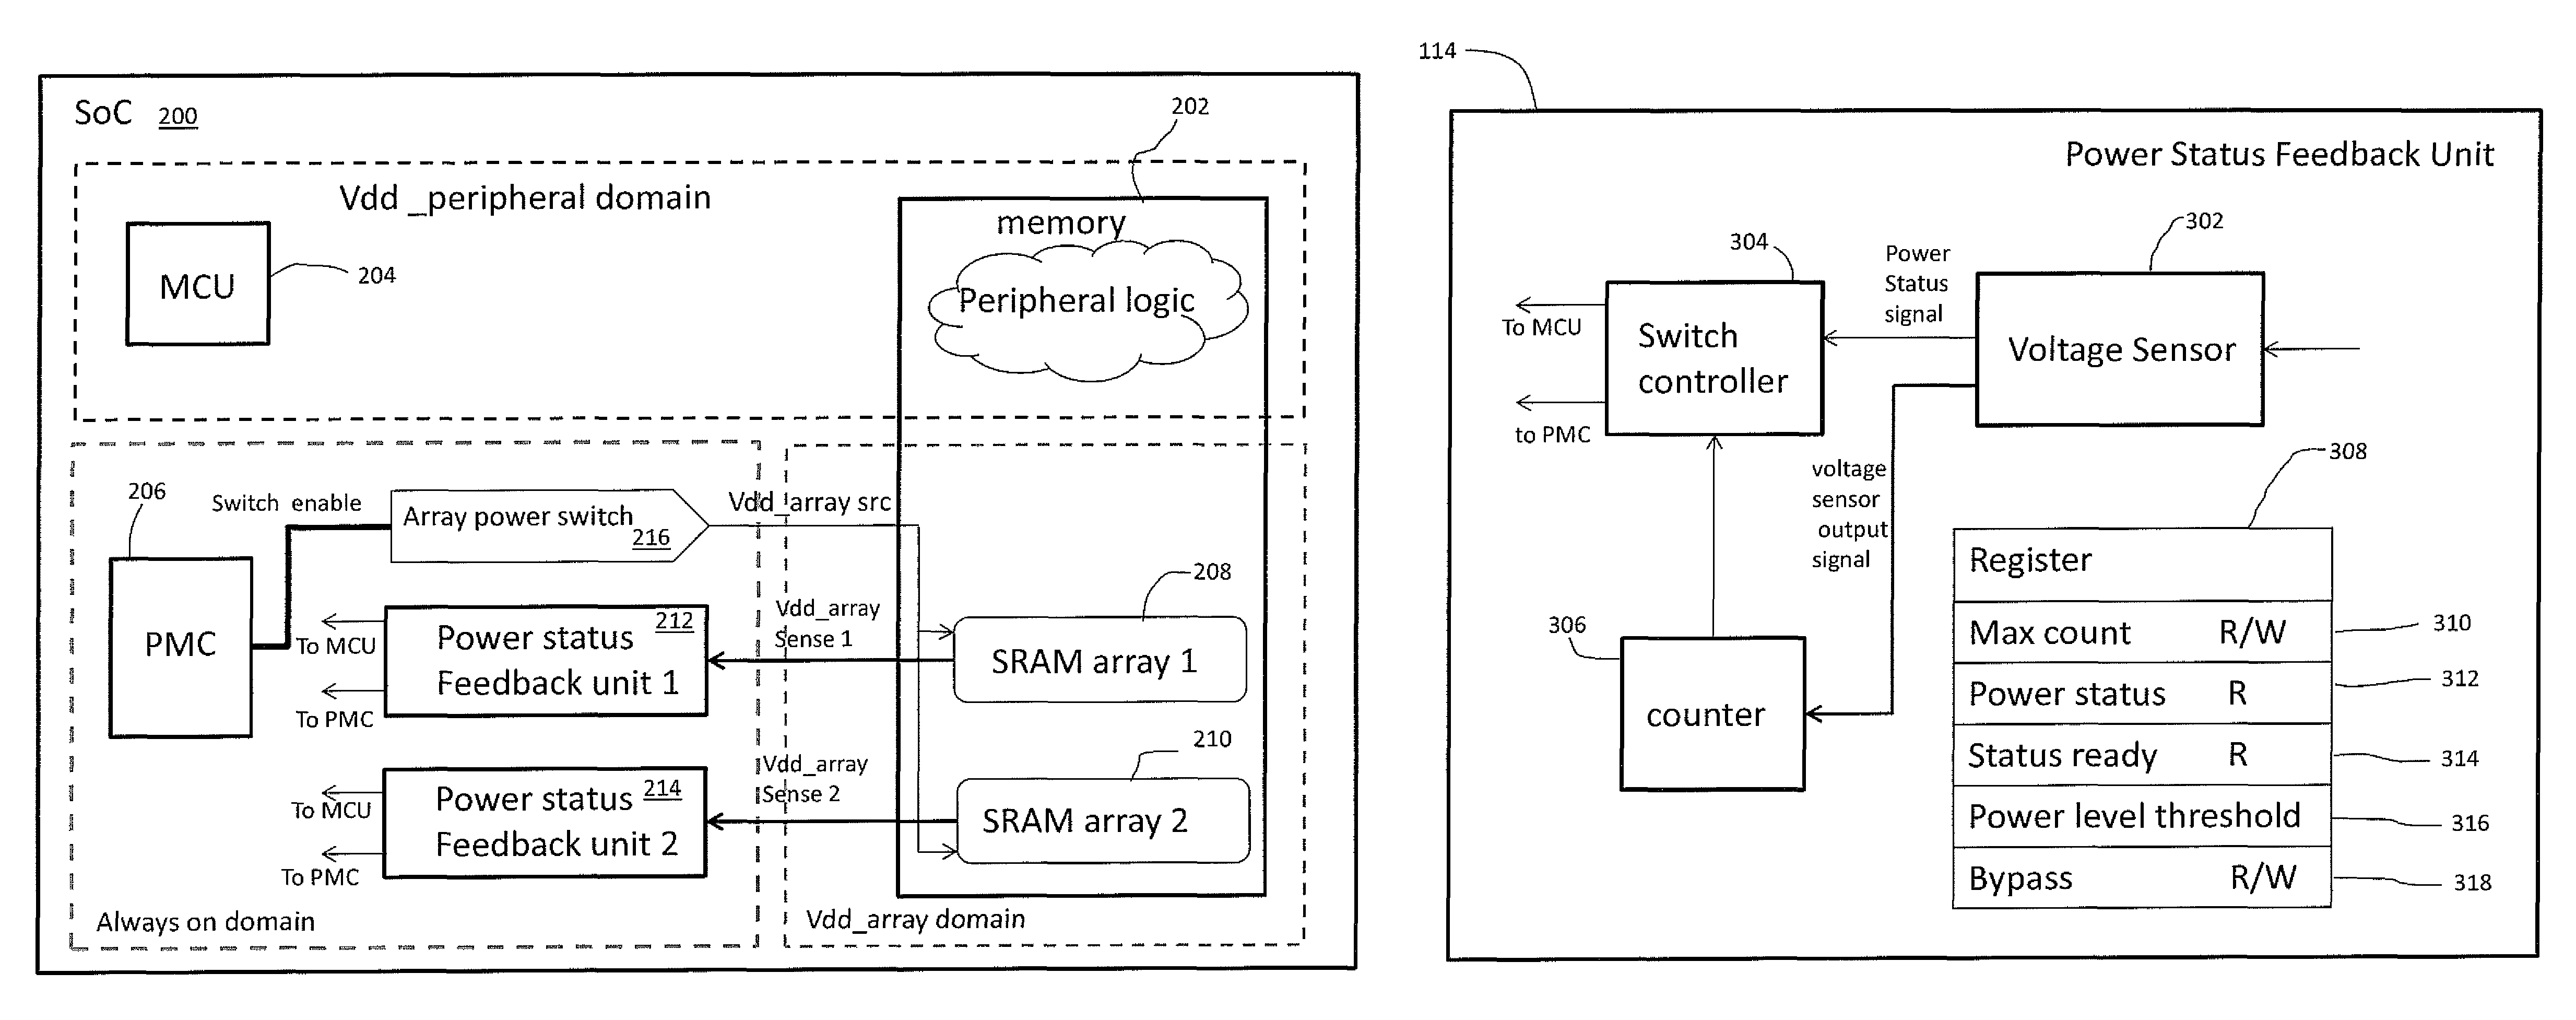 Performance based power management of a memory and a data storage system using the memory